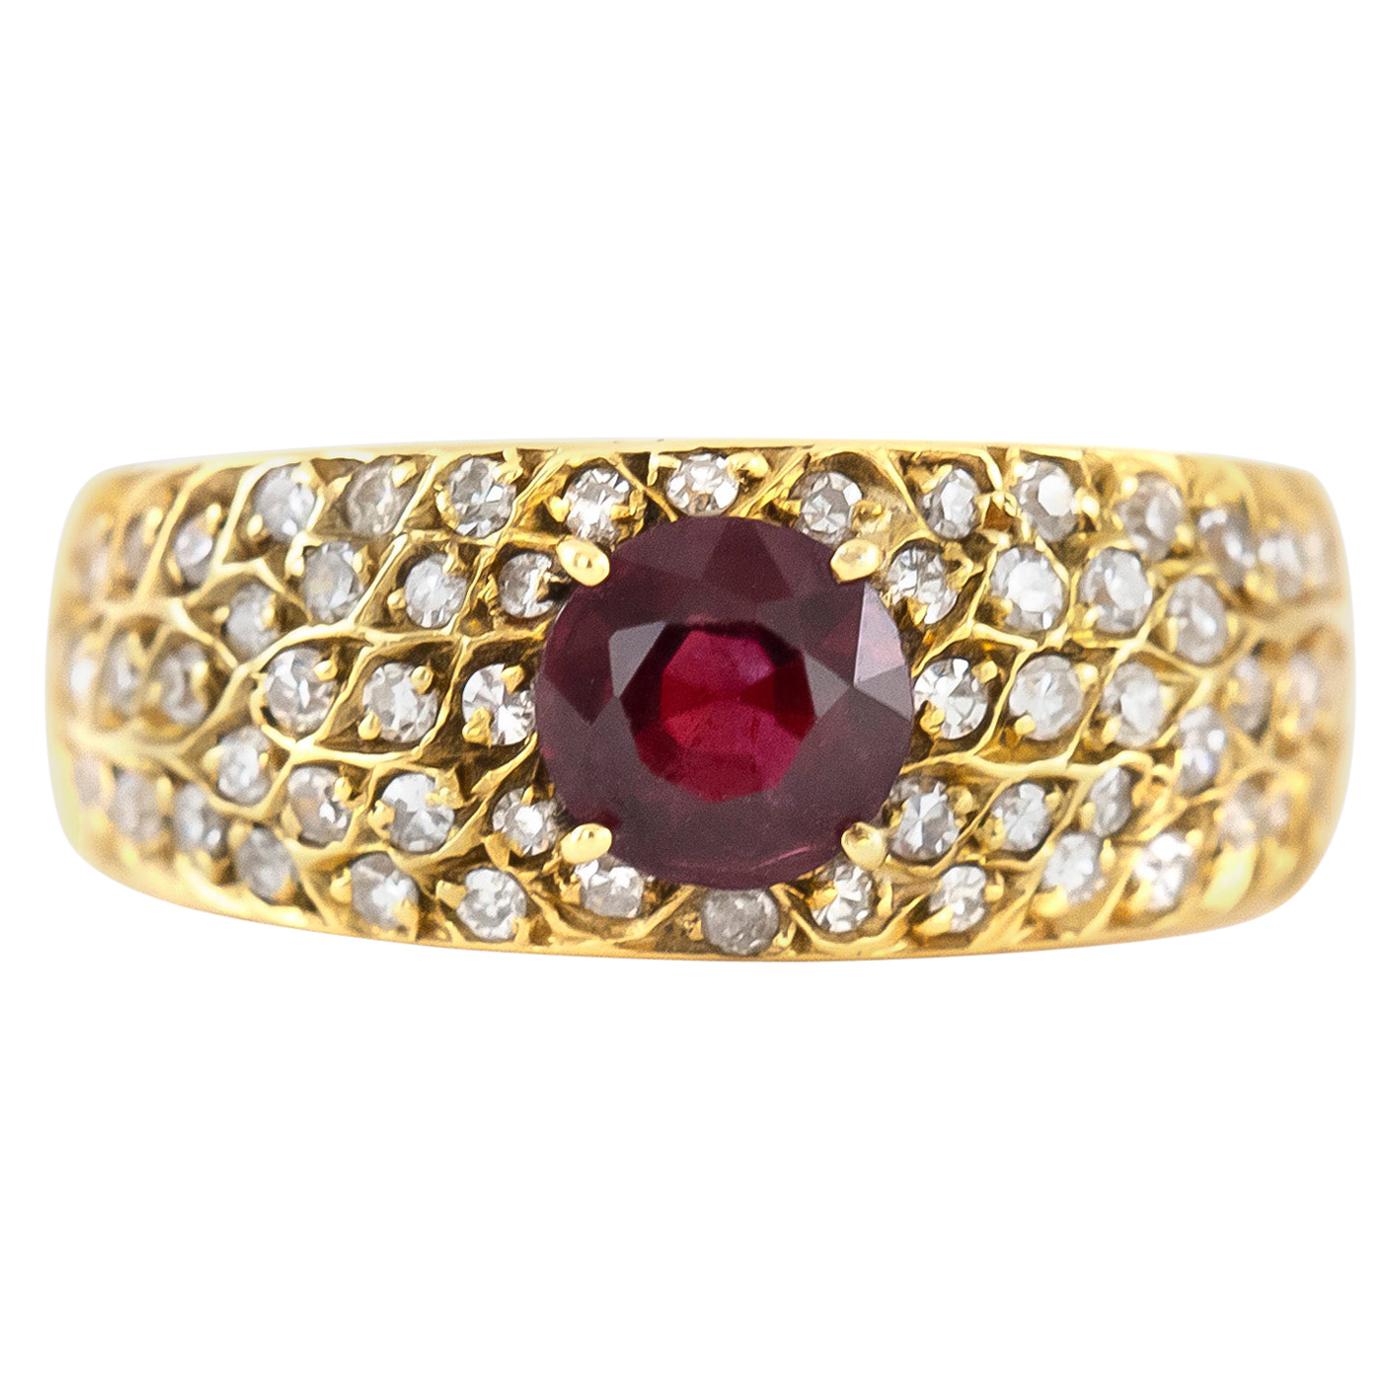 1980s Yellow Gold Diamonds with Center Ruby Ring